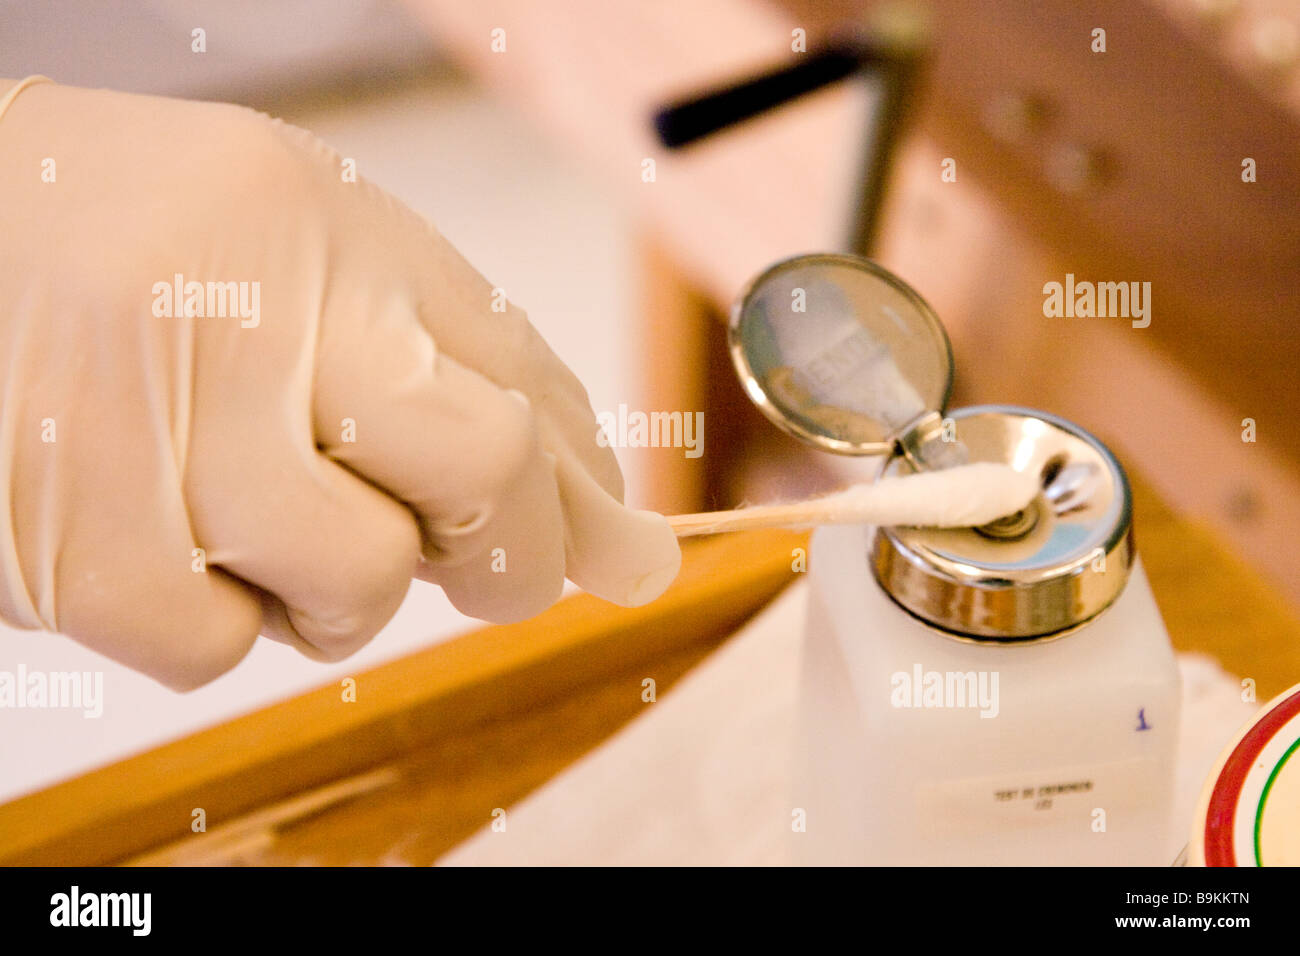 Hand with gloves and a cotton swab taking a porduct from a bottle in a laboratory. Stock Photo